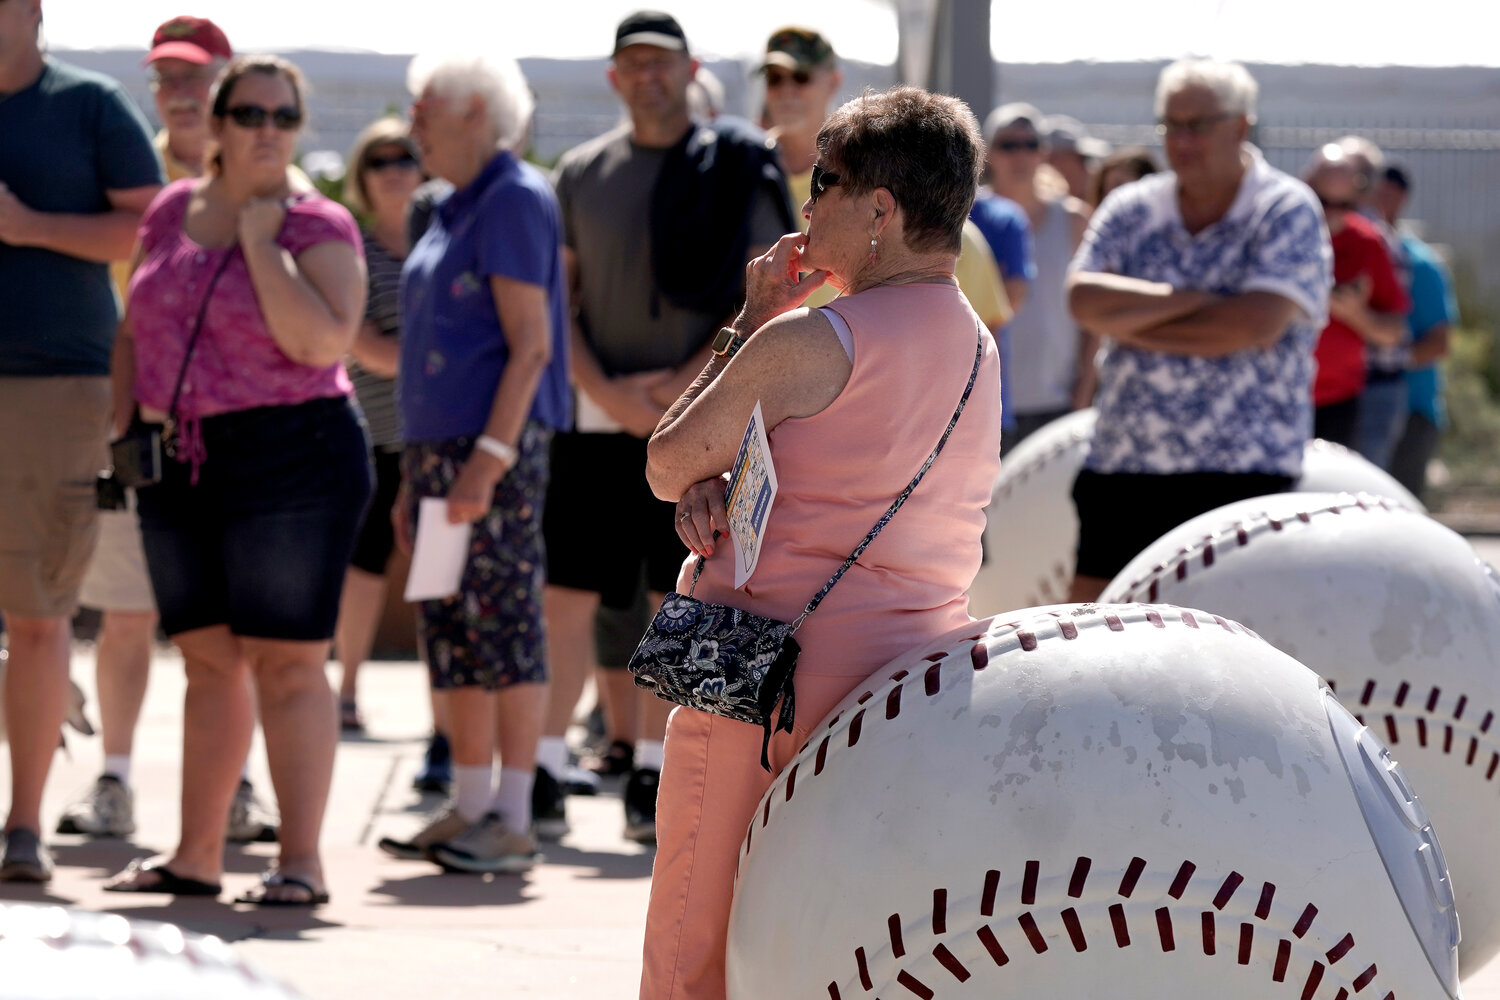 People wait in line to buy tickets for spring training games at the Peoria Sports Complex in this March 16, 2022, file photo.